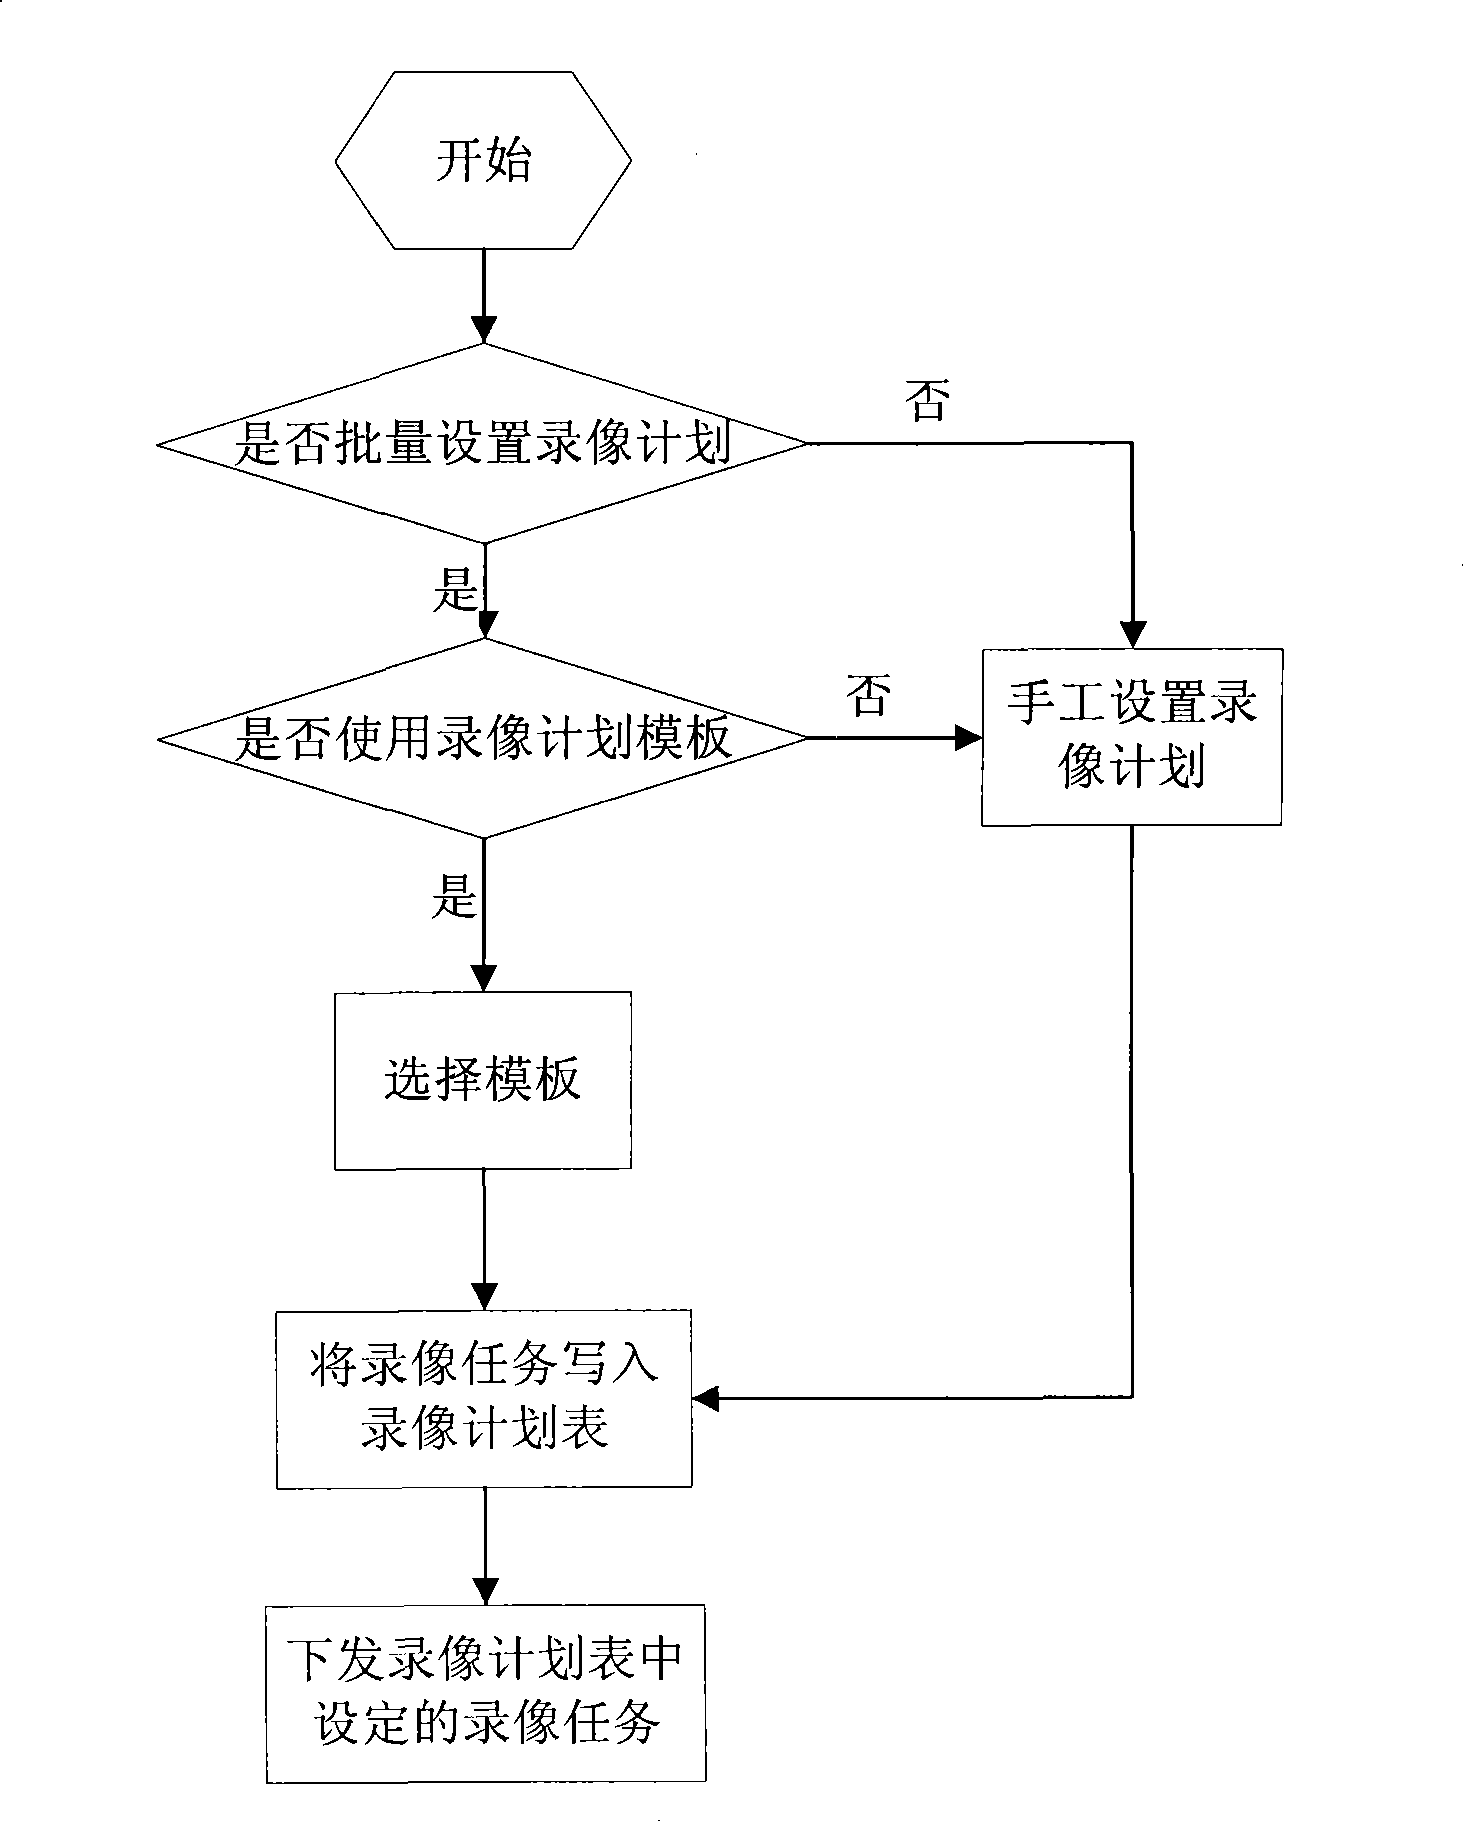 Method and apparatus for customizing frontend picture recording of video monitoring system